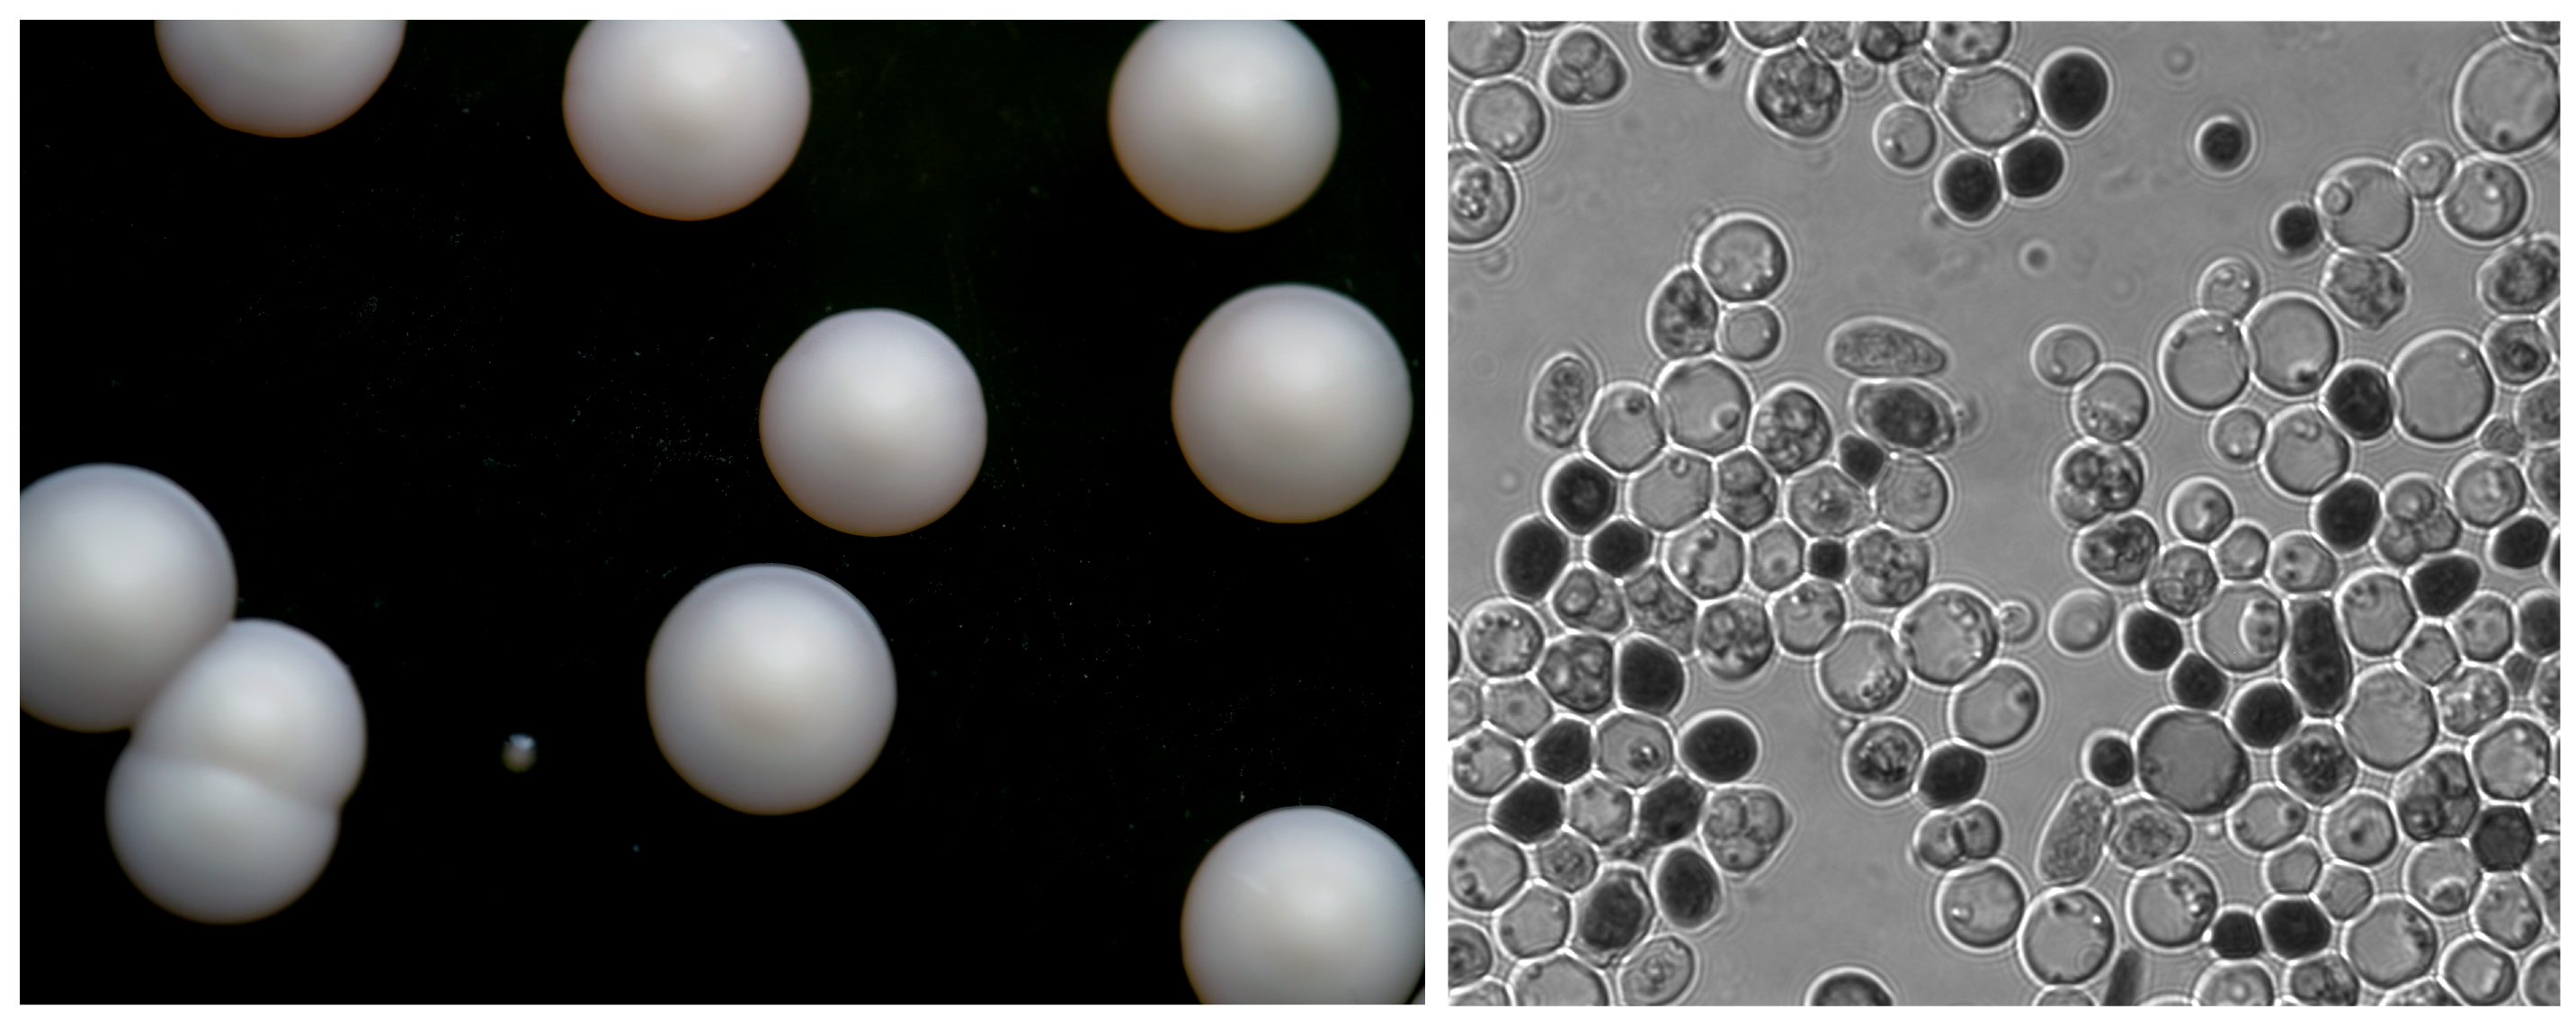 Left: S. bayanus  growing as colonies.  The tiny shiny colony is a bacterial species that snuck onto the yeast plate.   Right: S. bayanus cells at magnification.